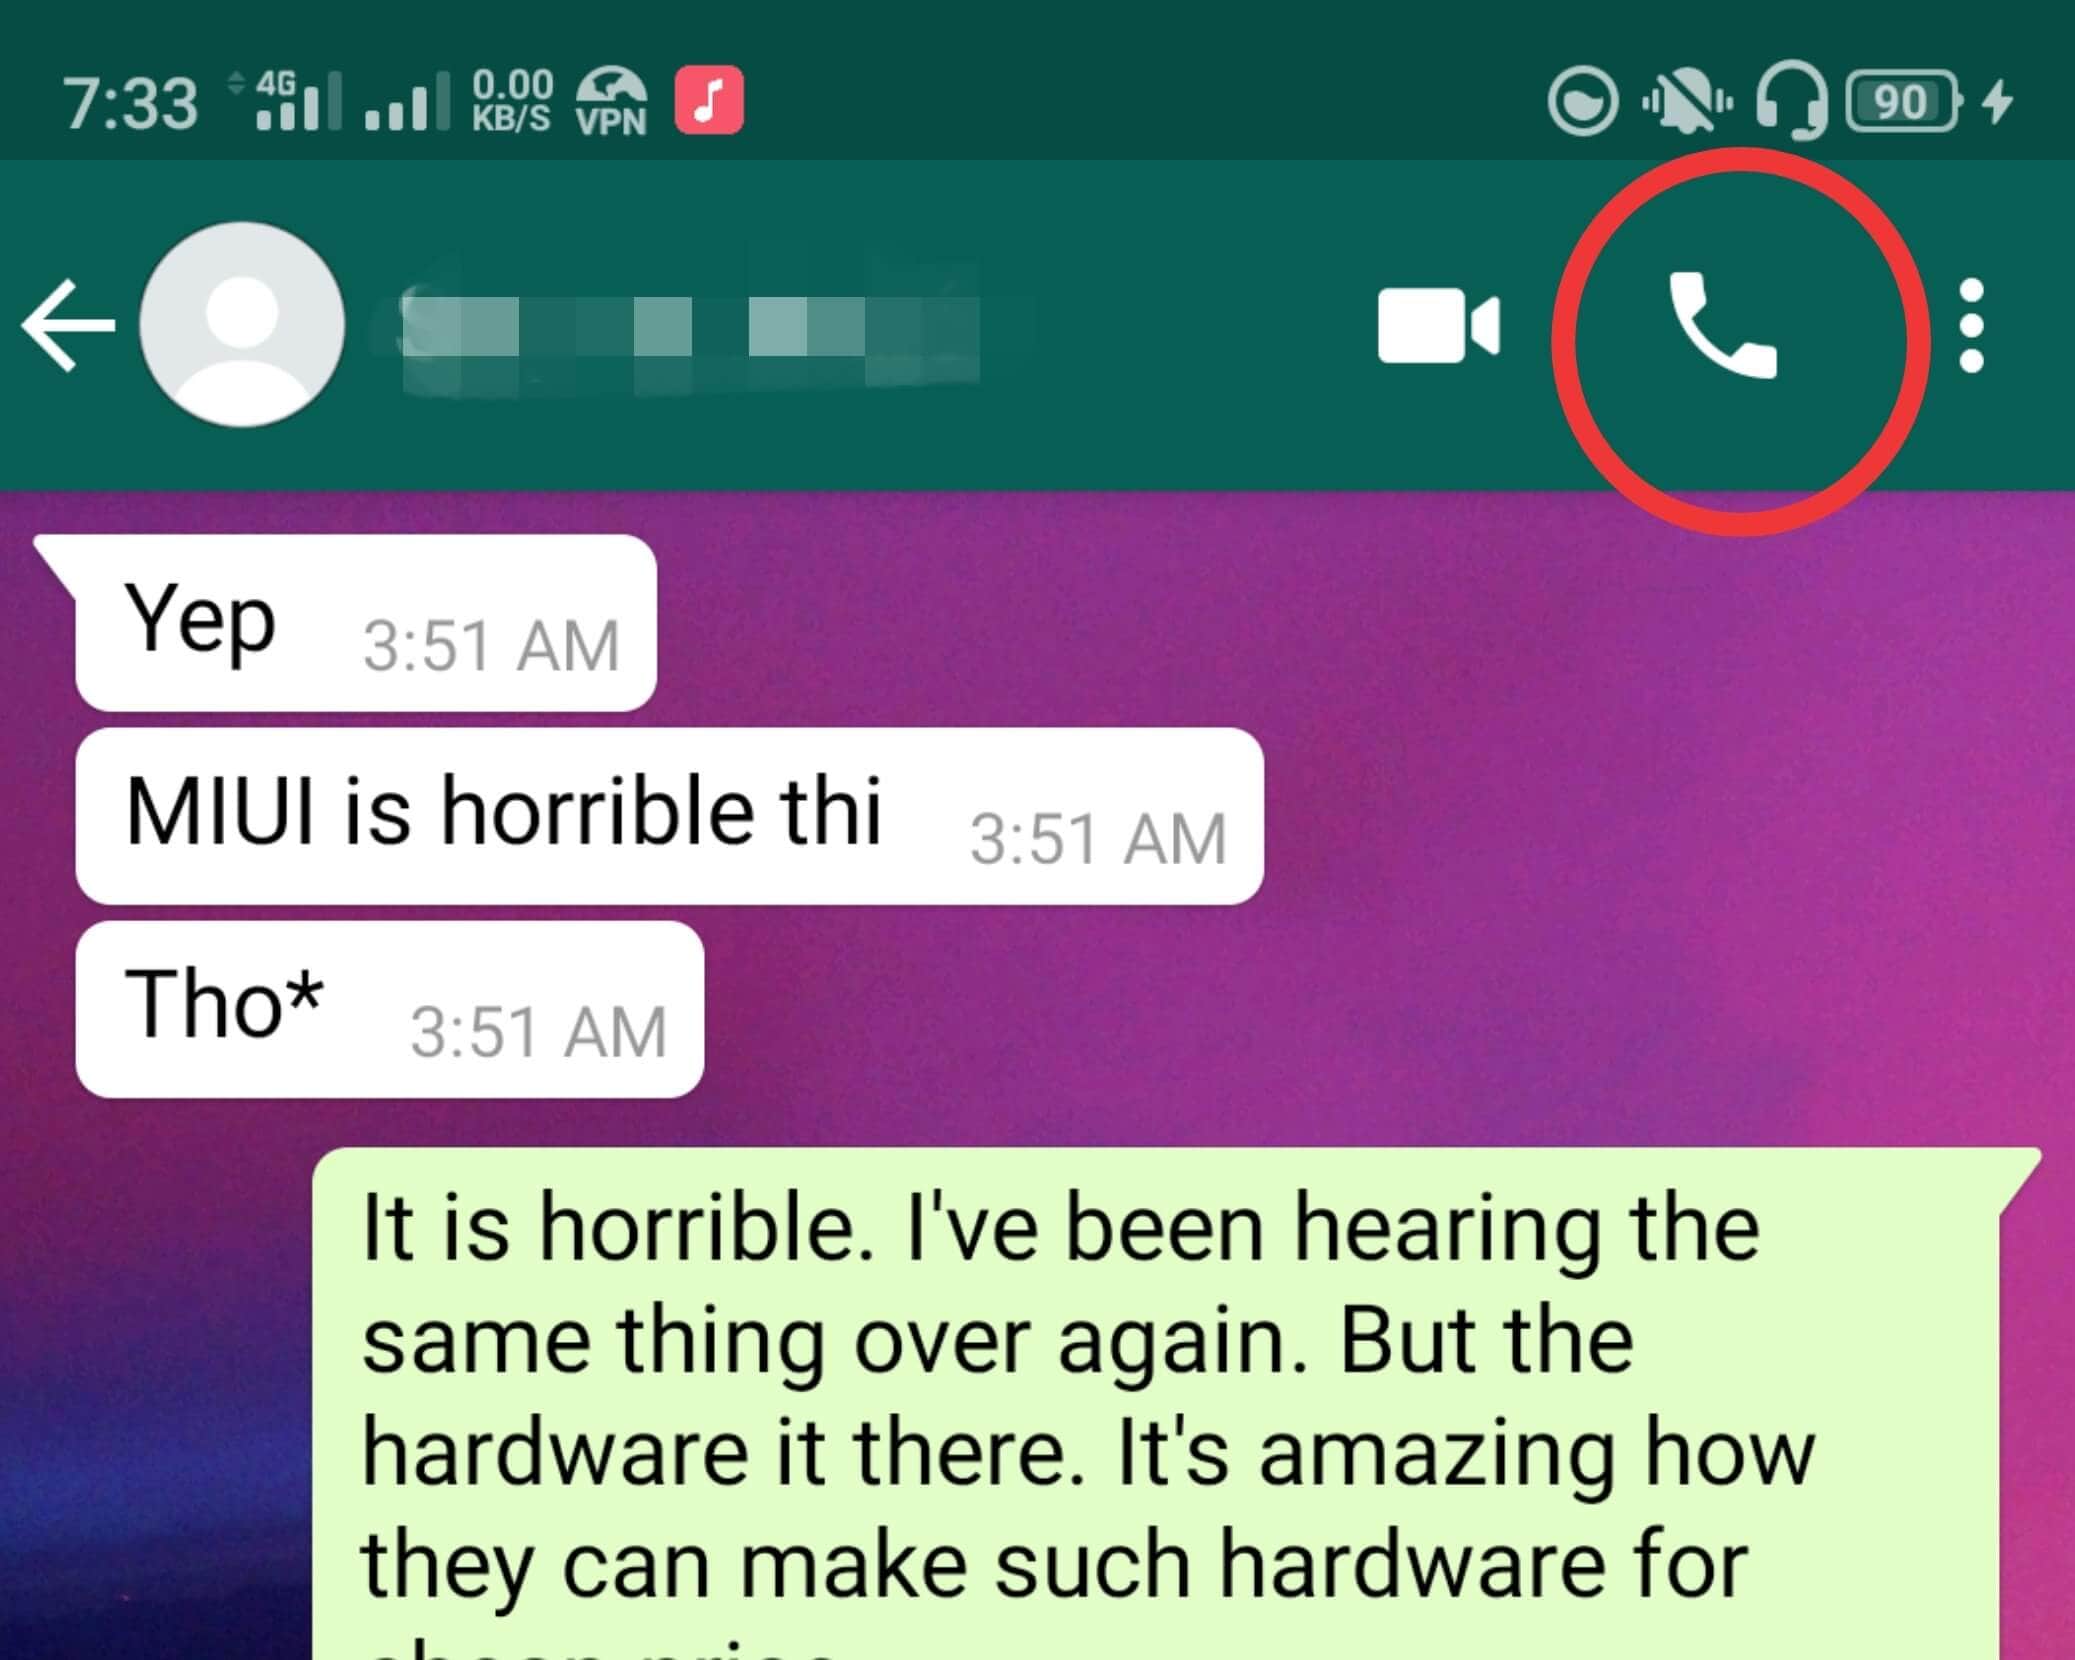 5 ways to tell if someone blocked you on WhatsApp?